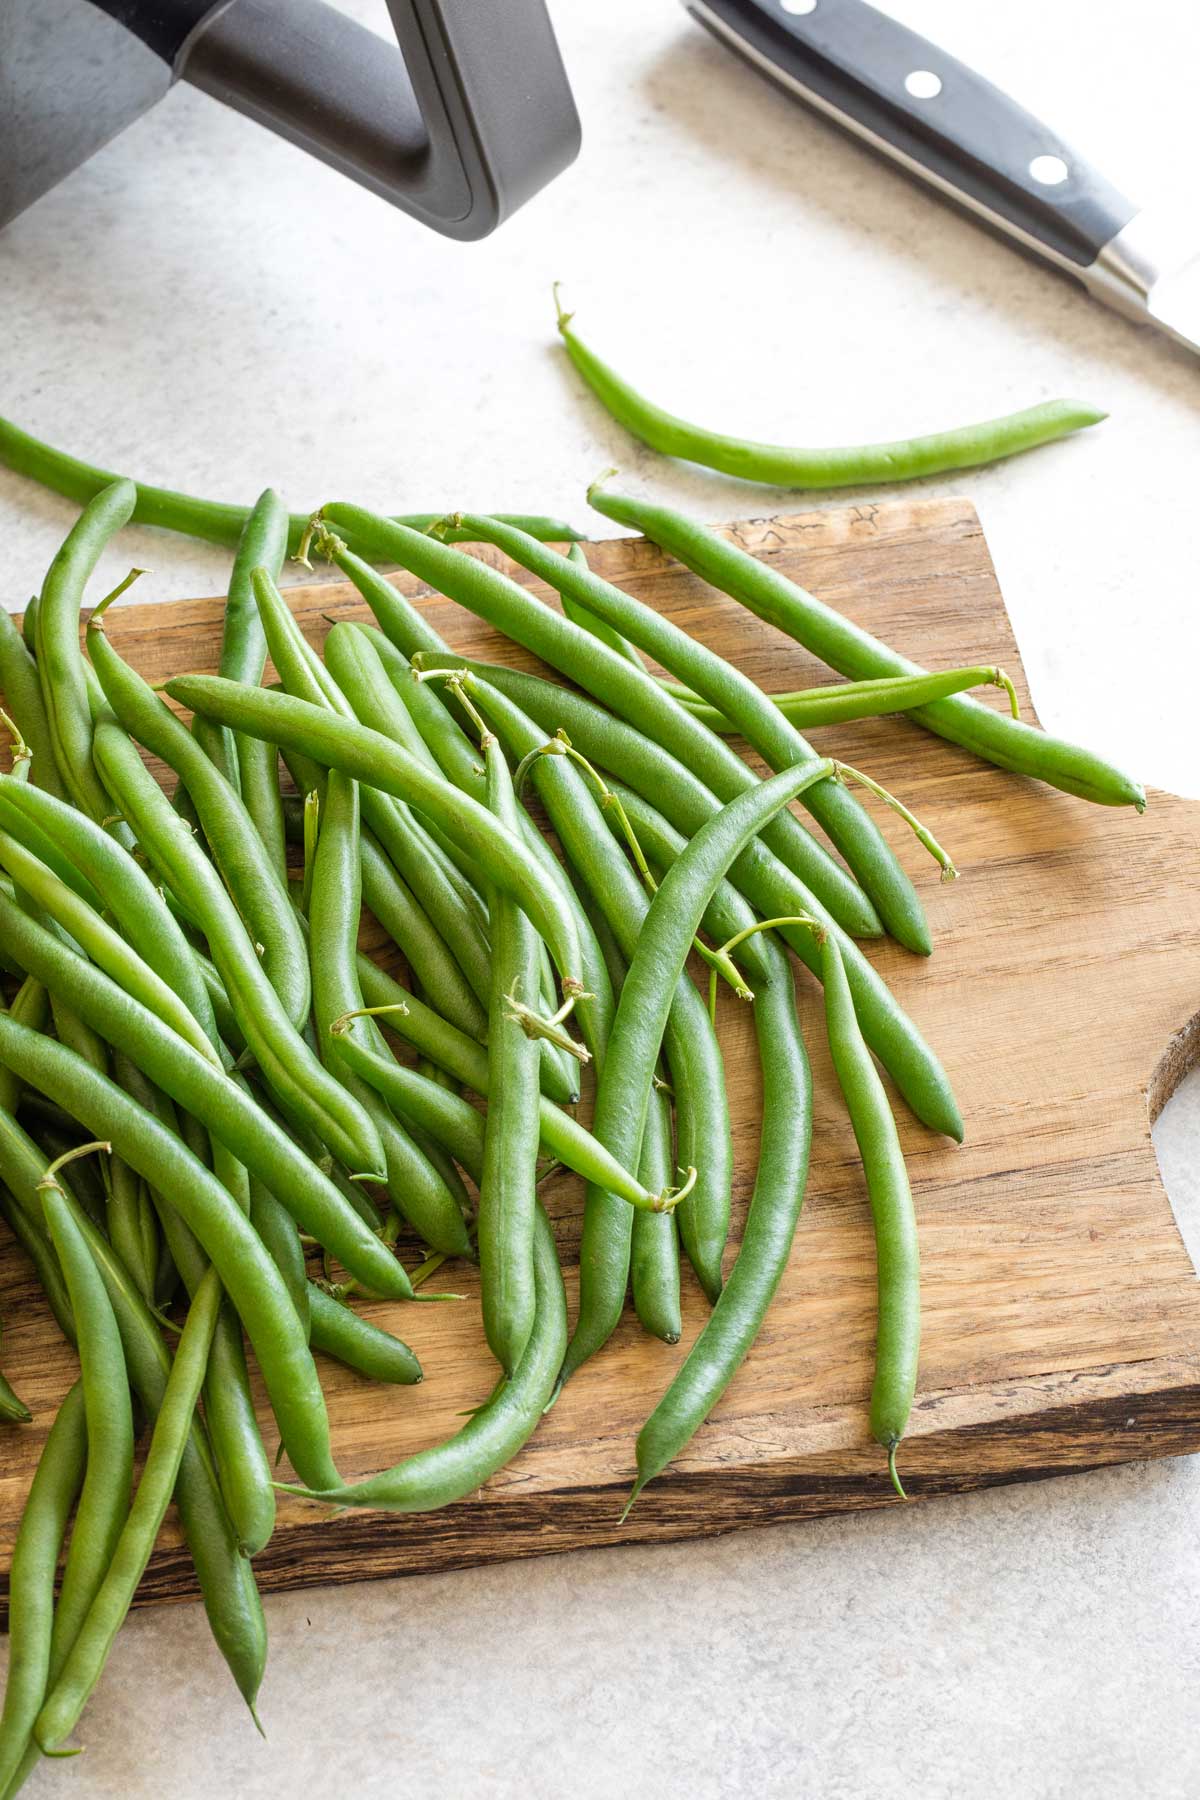 Raw, fresh green beans tumbled across wooden cutting board with air fryer in background.